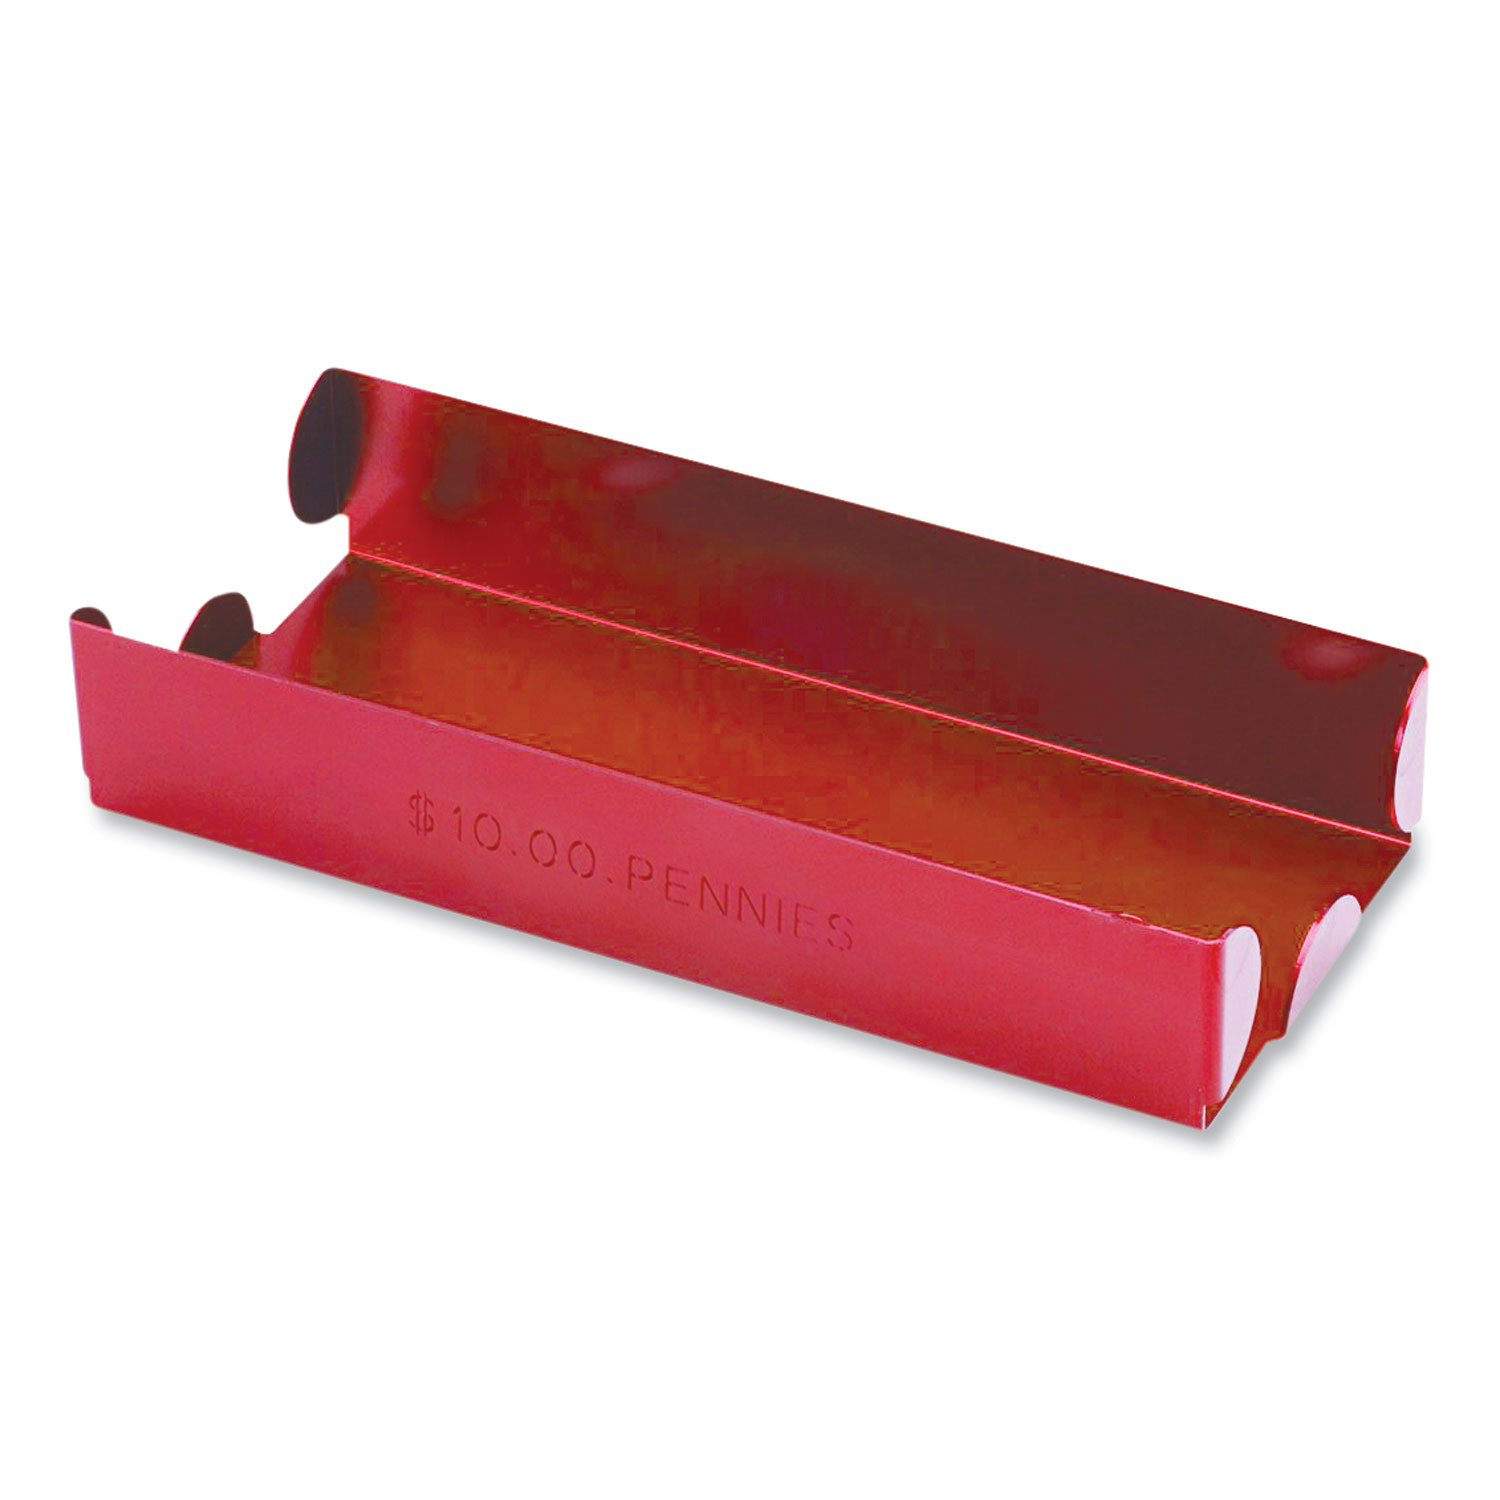 CONTROLTEK® Metal Coin Tray, Pennies, 3.5 x 10 x 1.75, Red